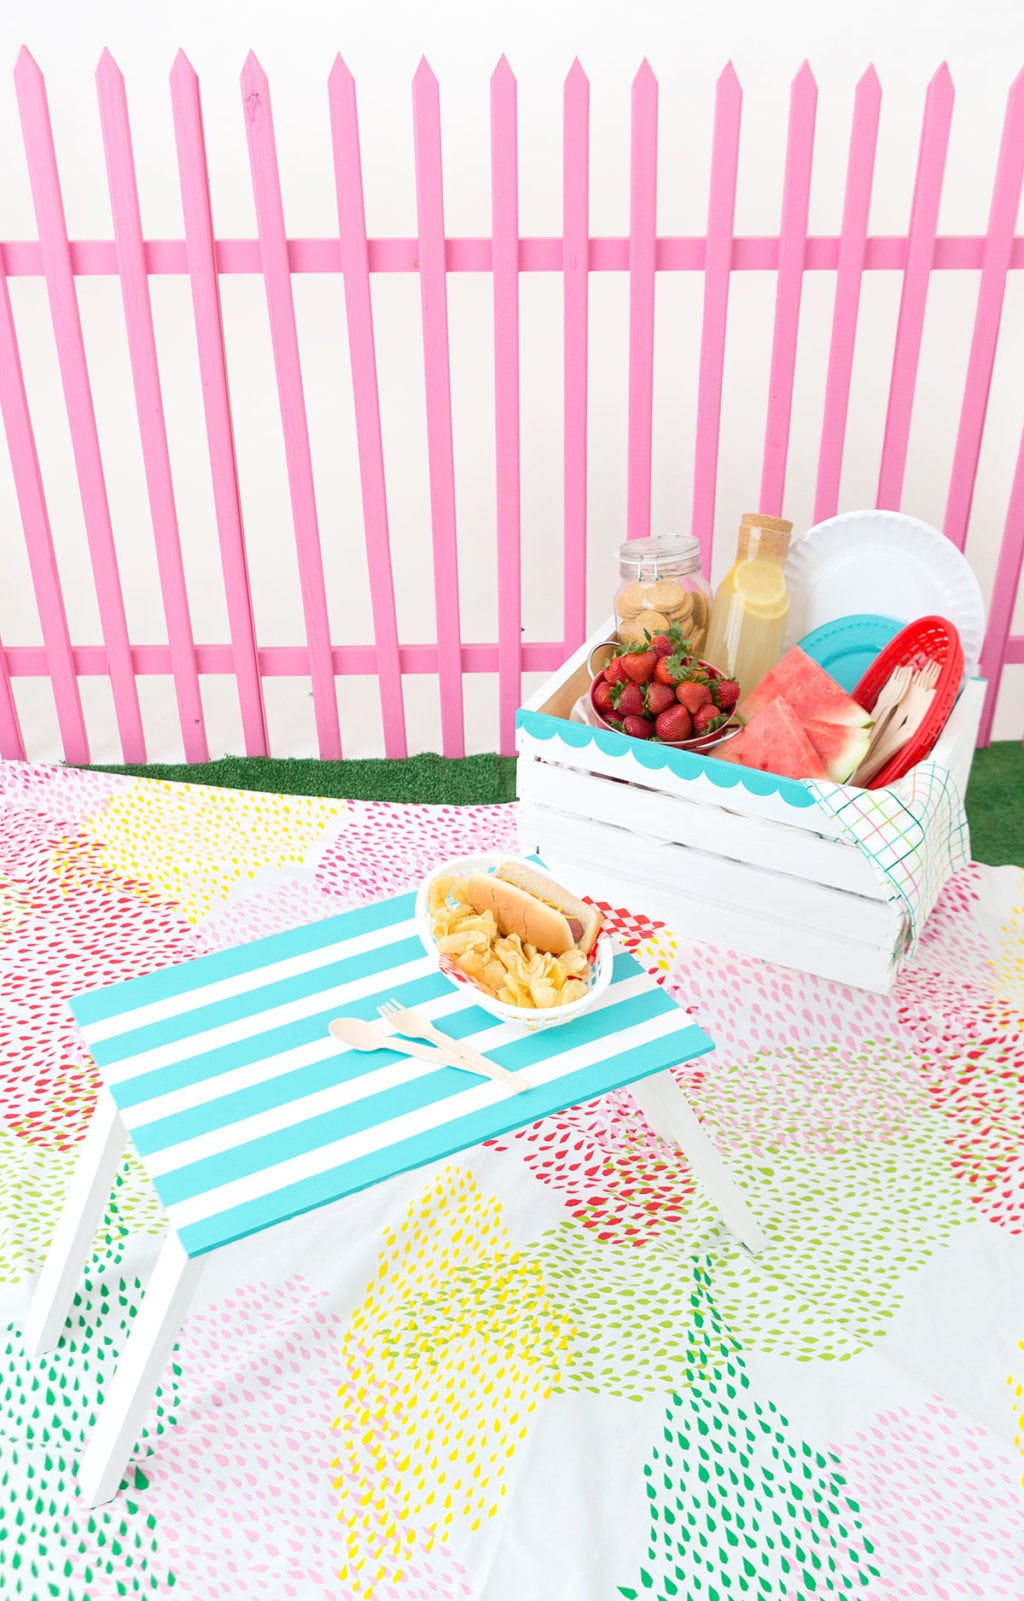 Enjoy the outdoors with this DIY Wooden Crate Picnic Basket that is easy to create with paint and simple tools. Great for enjoying the end of summer. 